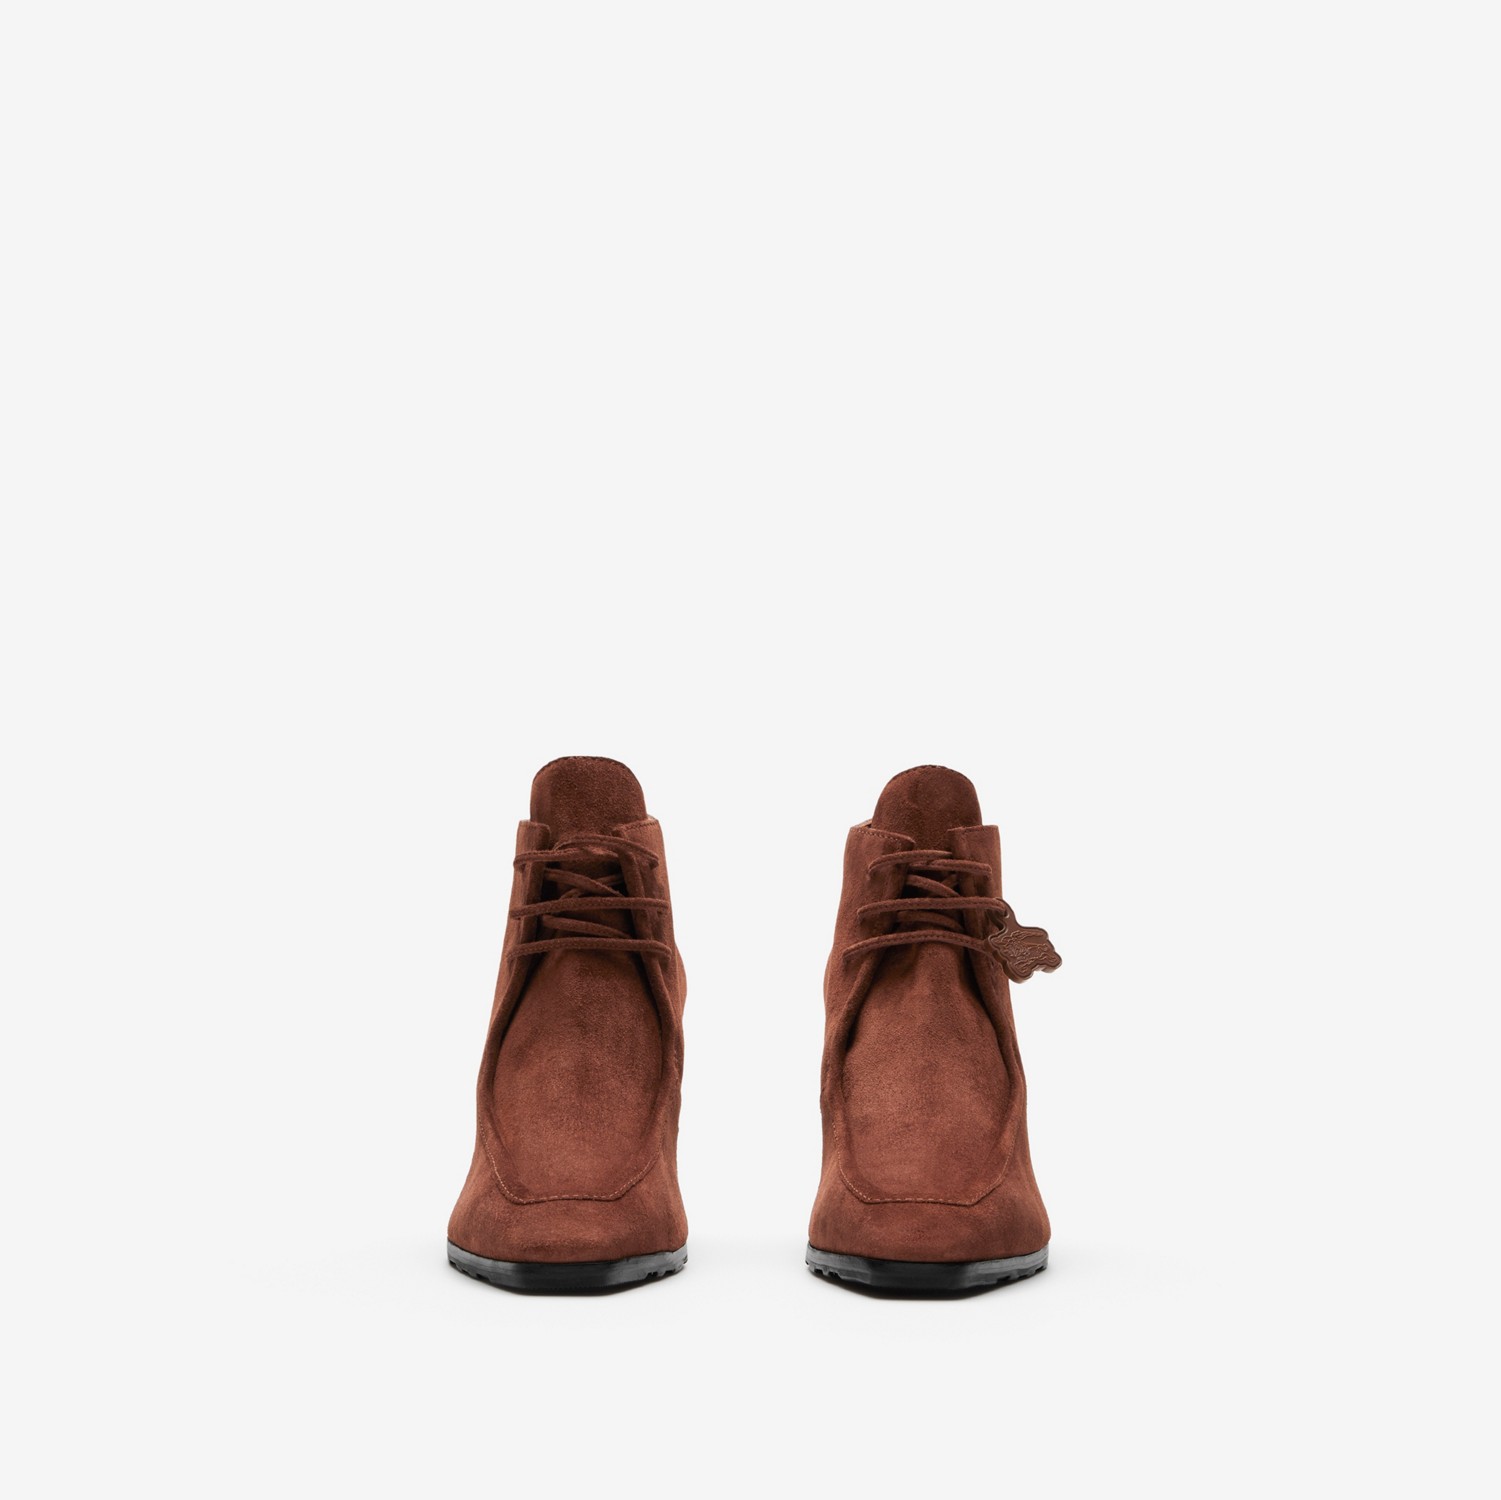 Suede Storm Ankle Boots in Brown - Women | Burberry® Official